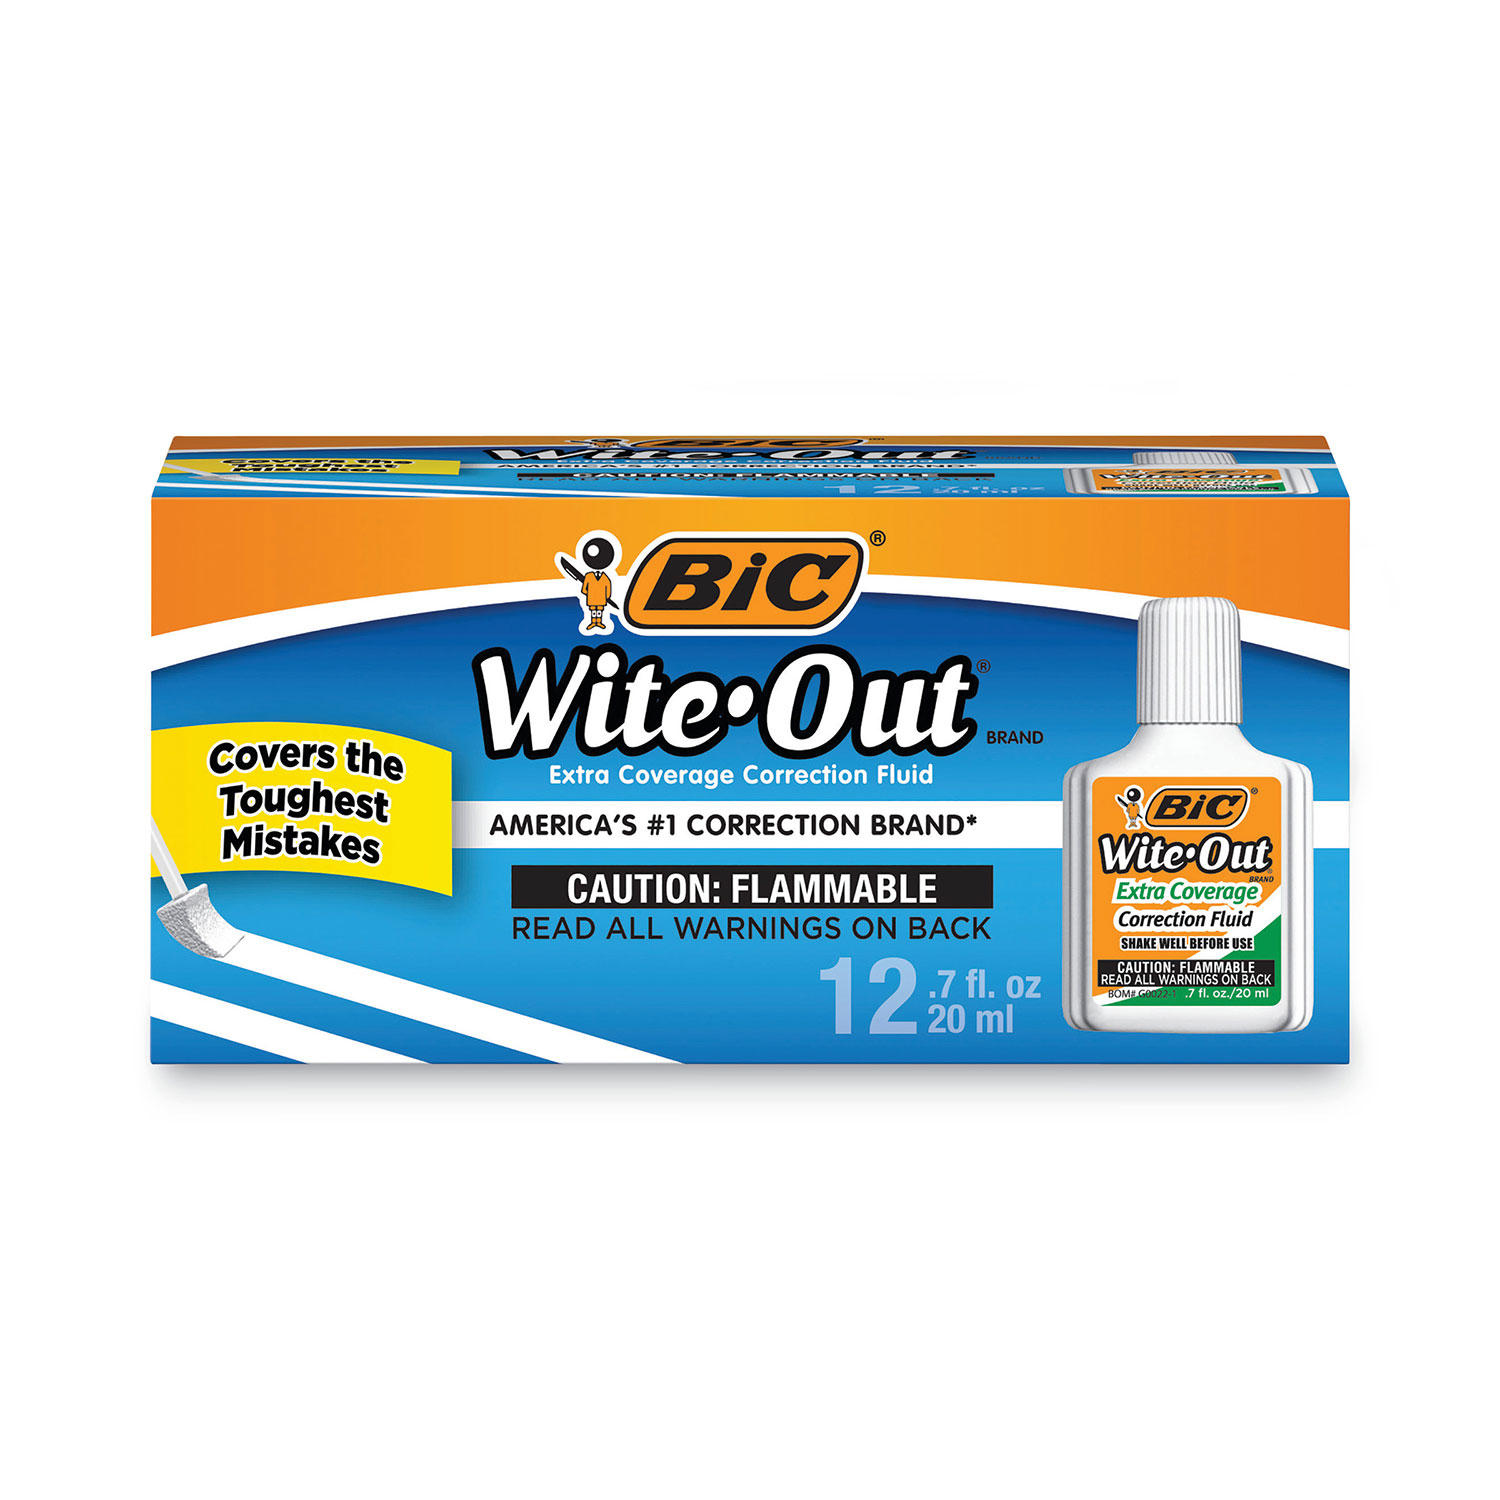 UPC 070330506169 product image for BIC Wite-Out Extra Coverage Correction Fluid, 20 ml Bottle, White, 12pk. | upcitemdb.com